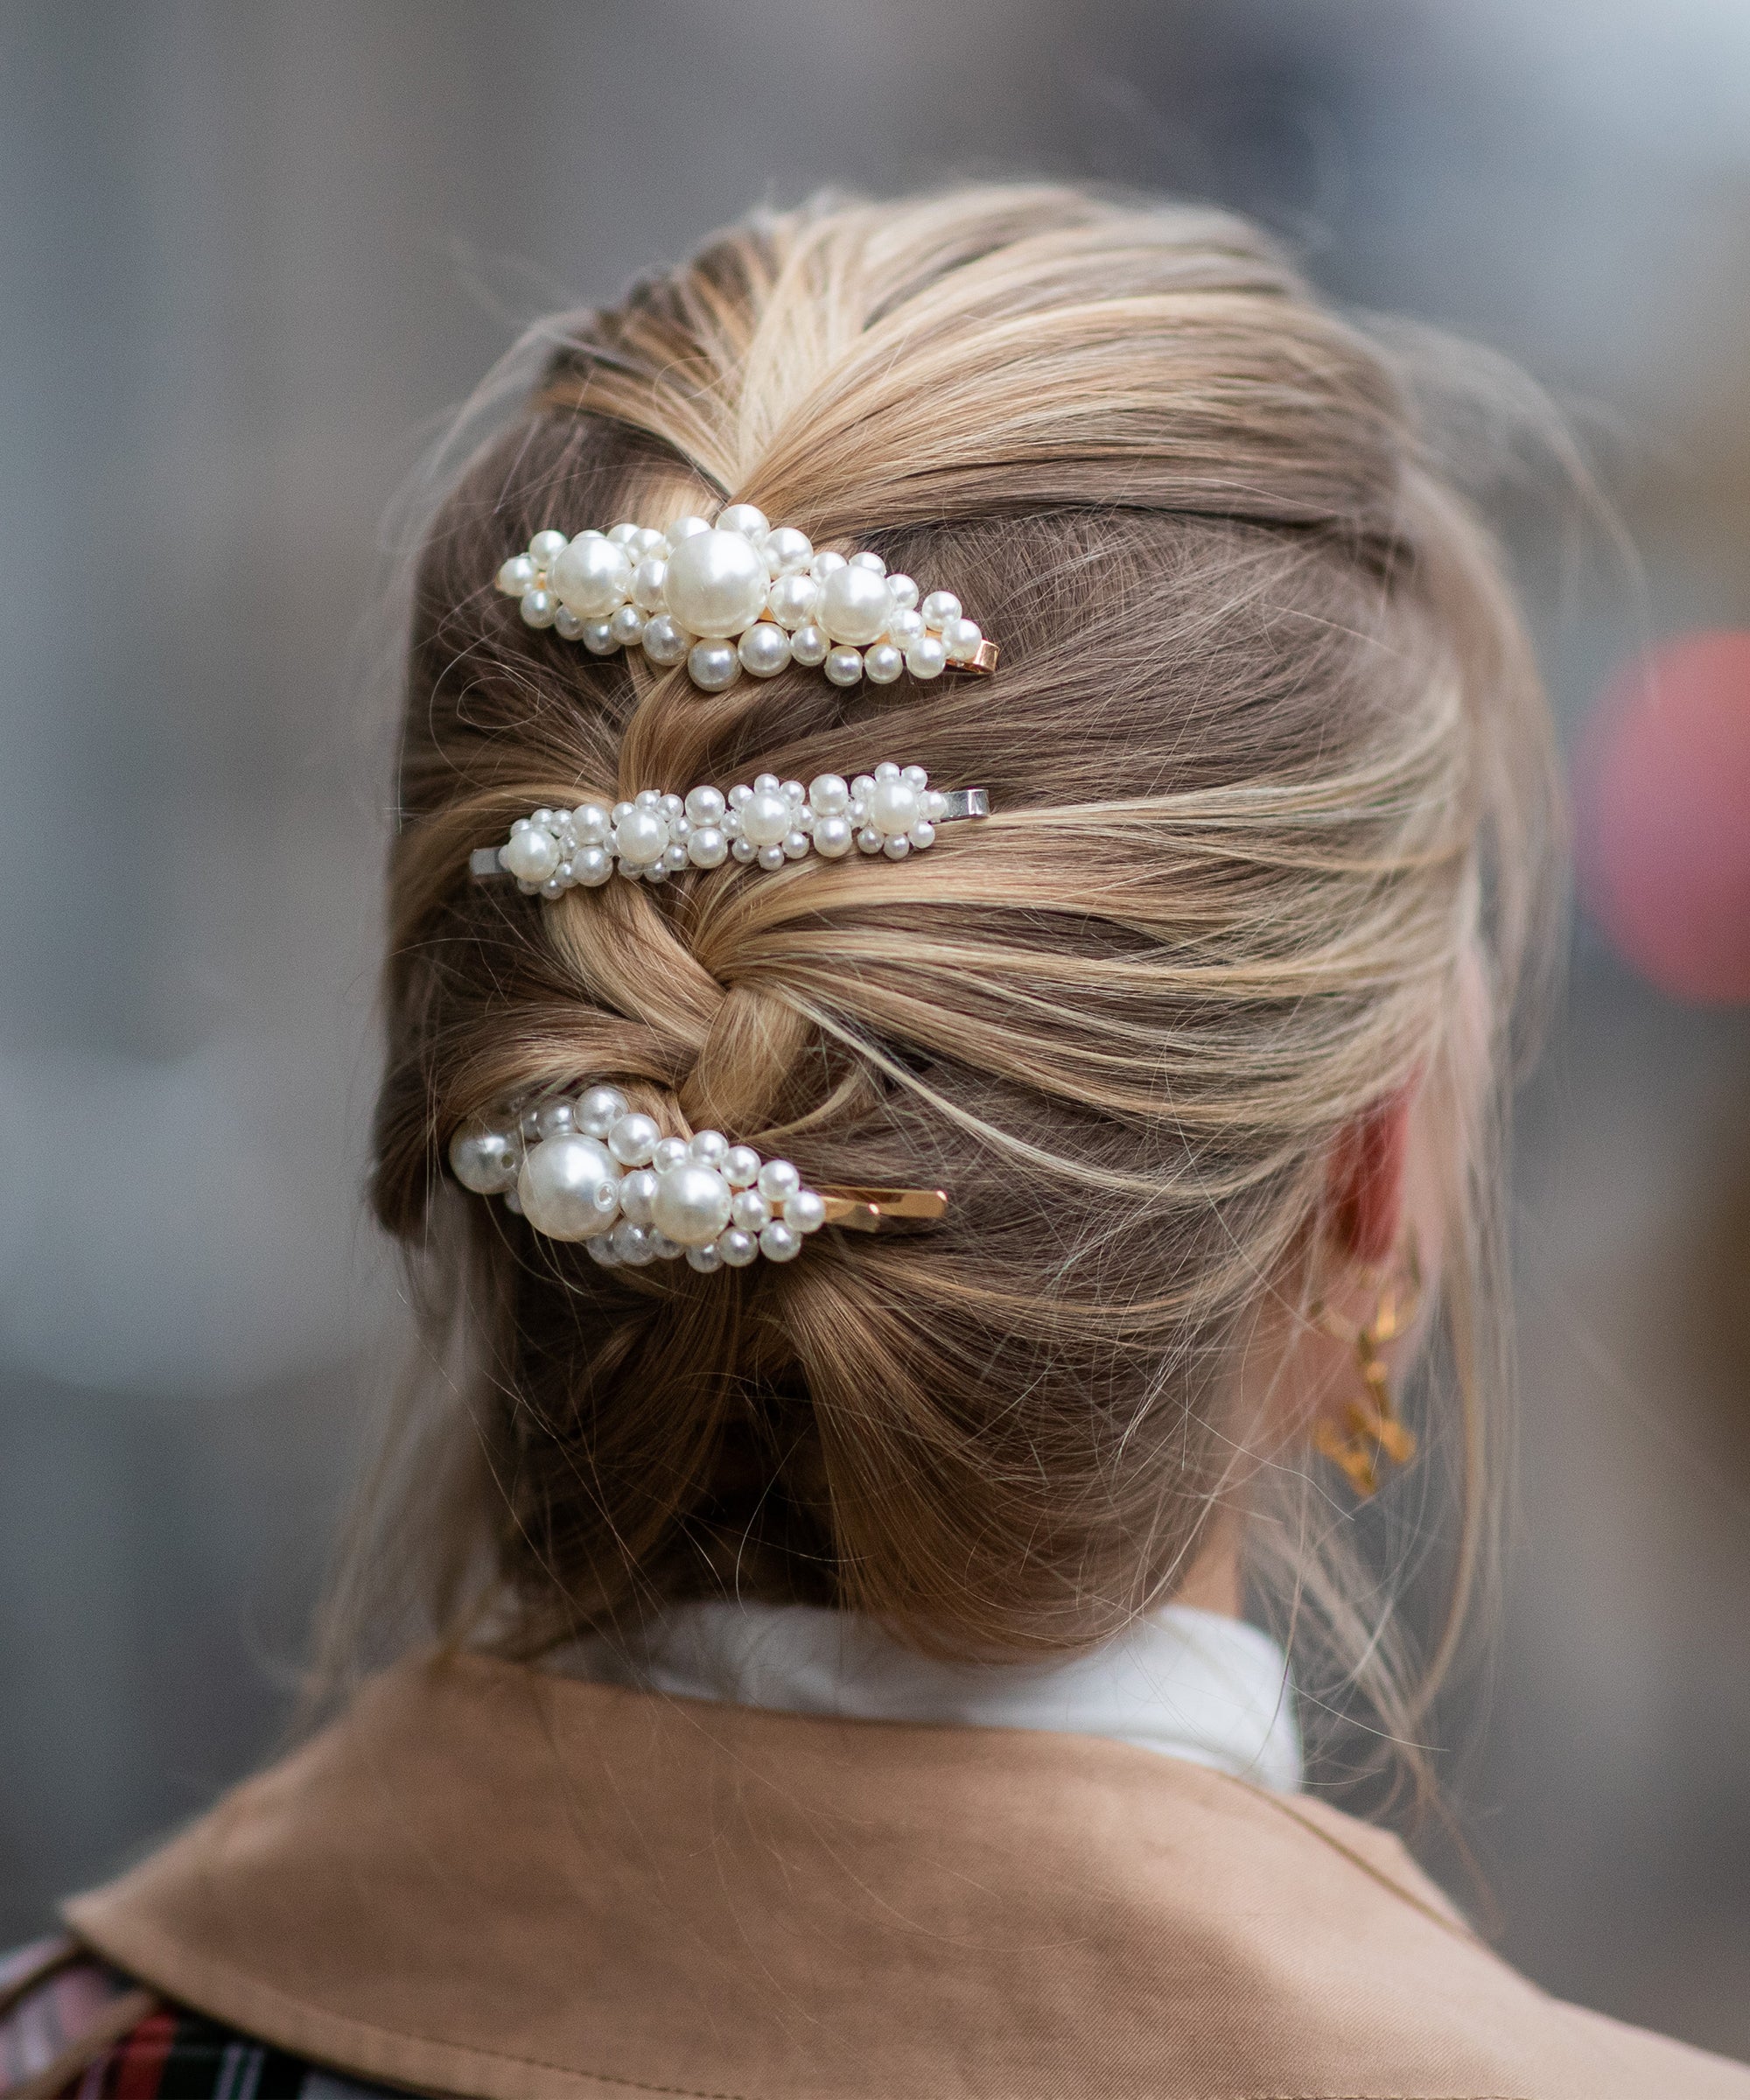 11 Best Hair Accessory Trends